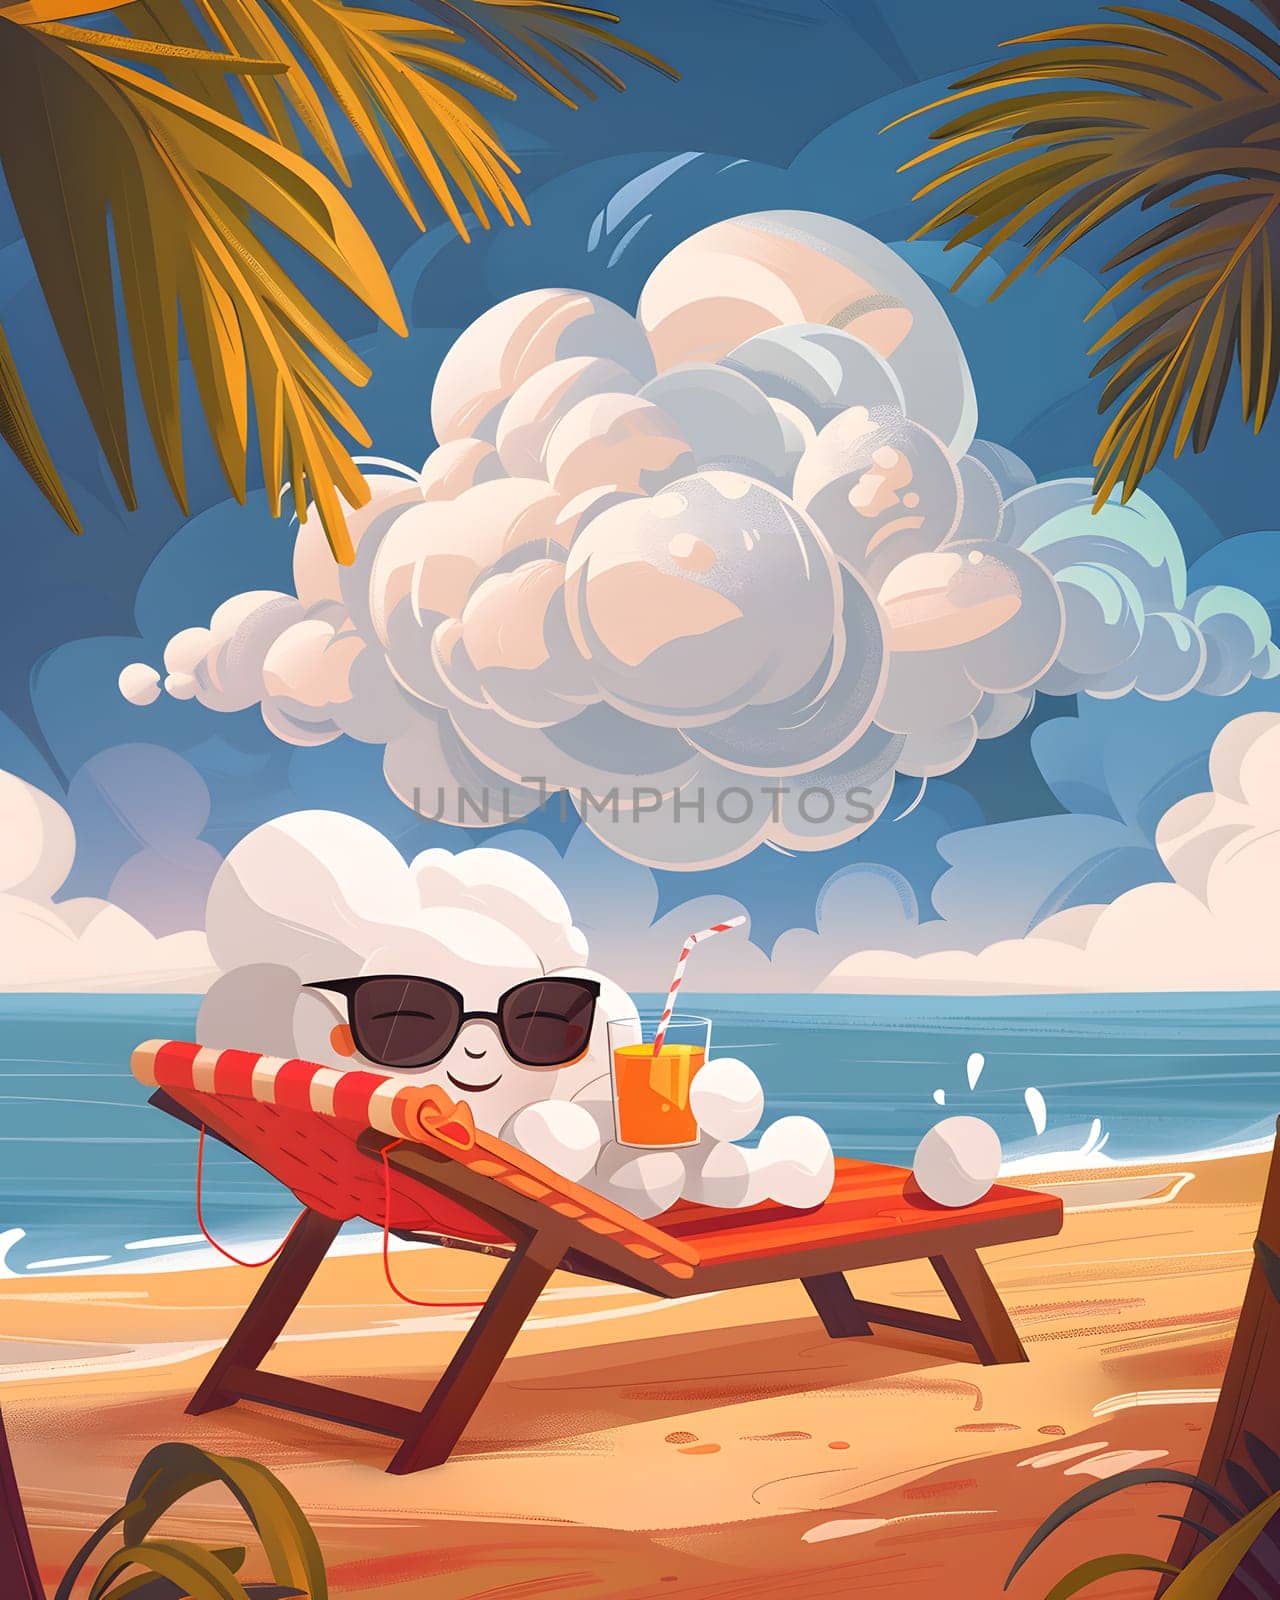 A cloud wearing sunglasses, enjoying nature on a beach chair with a drink in hand. The azure sky is the perfect backdrop for this outdoor leisure scene, resembling a painting